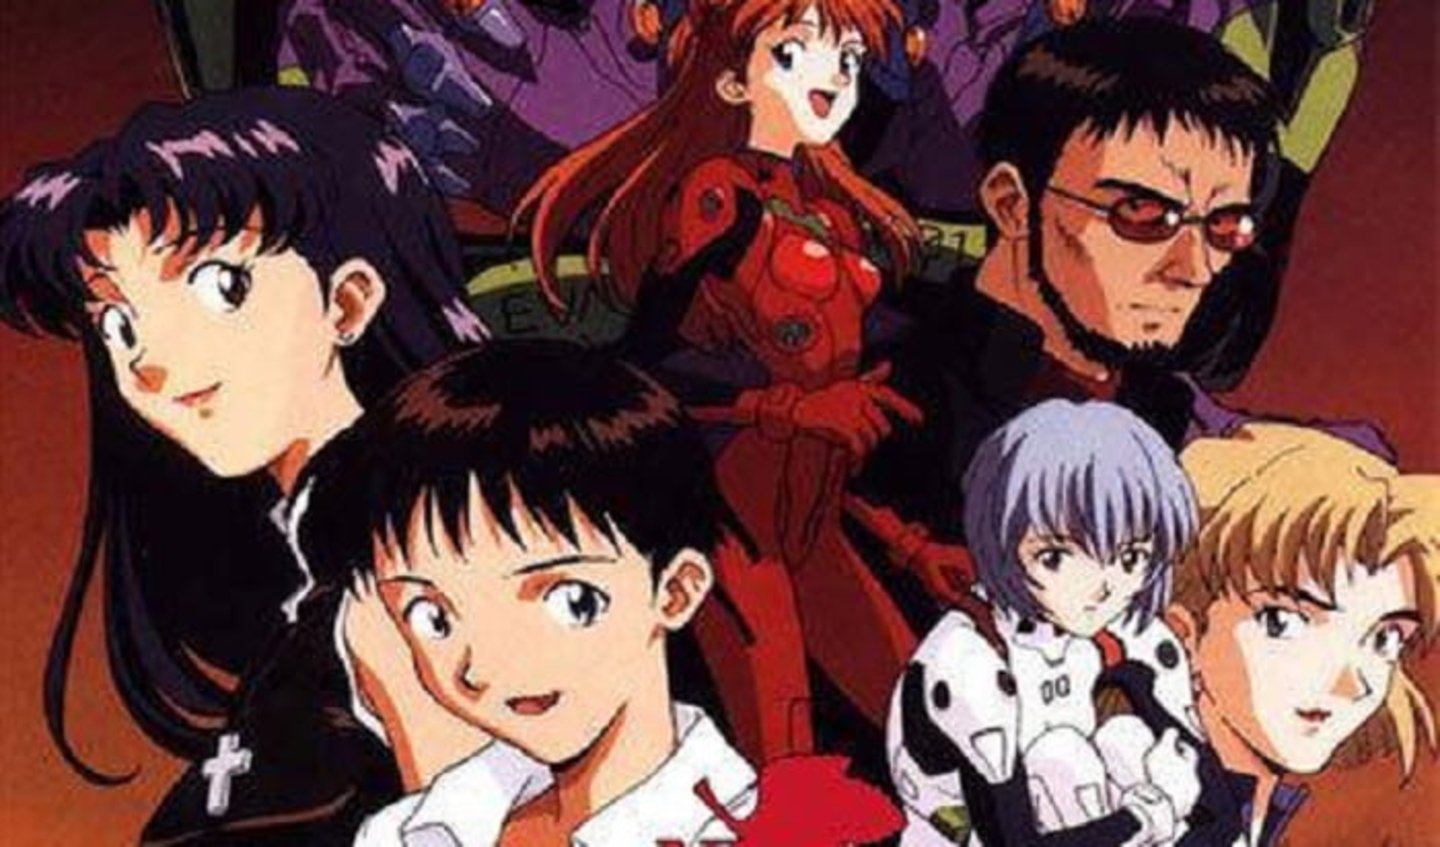 We show you several animation options quite similar to Neon Genesis Evangelion